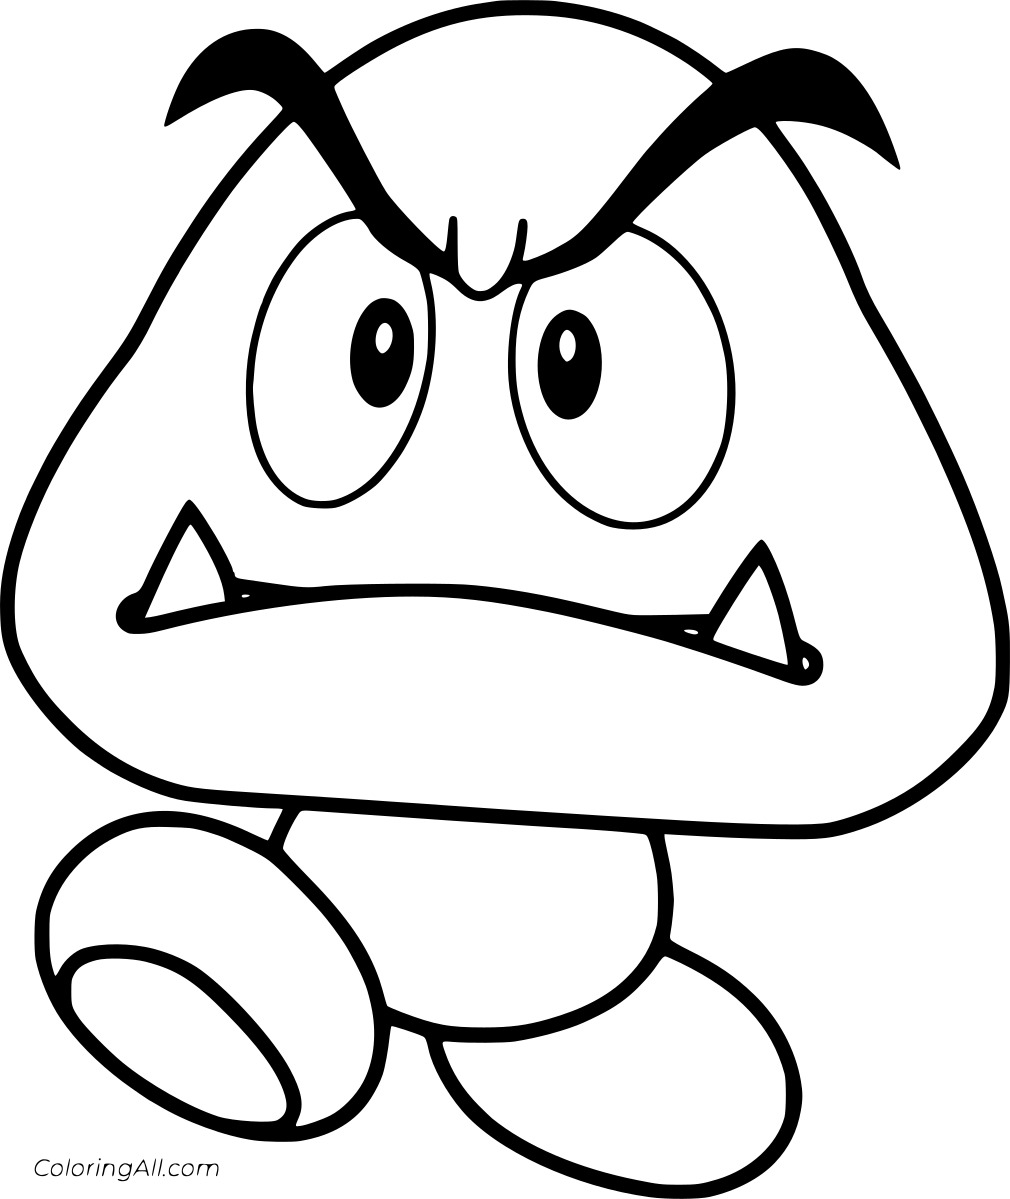 Angry Mushroom Coloring Page